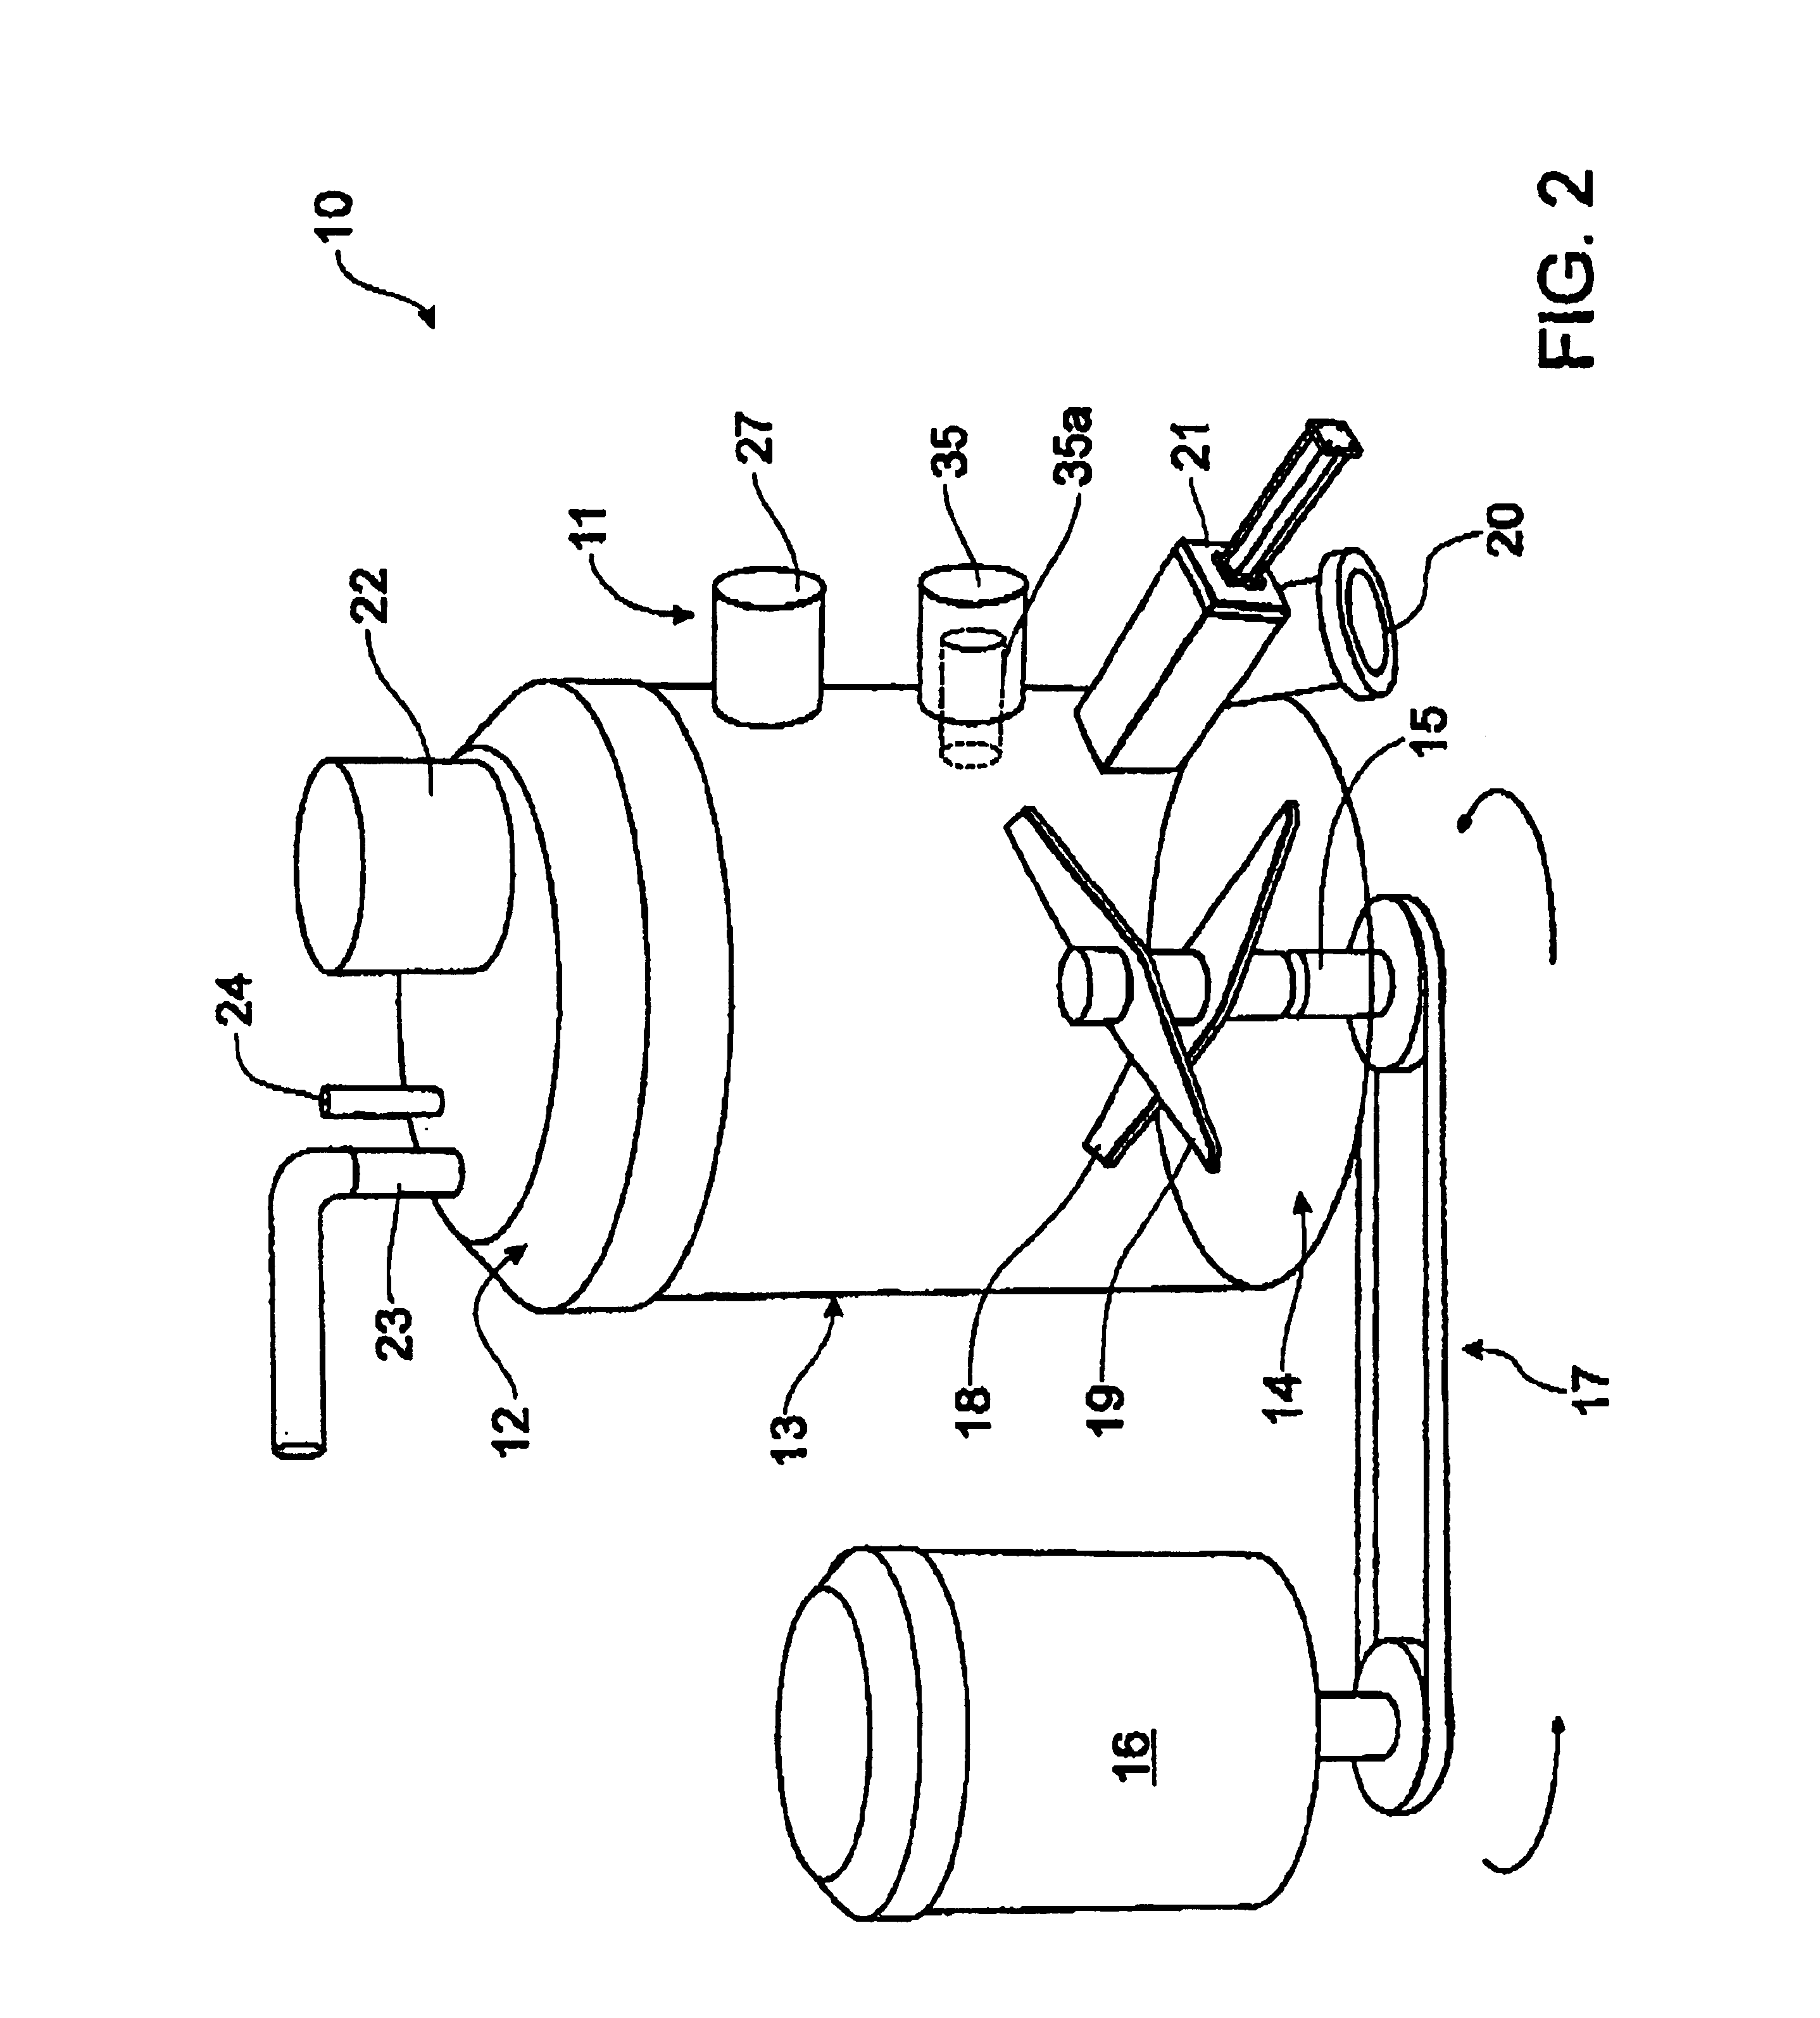 Snow making method and apparatus